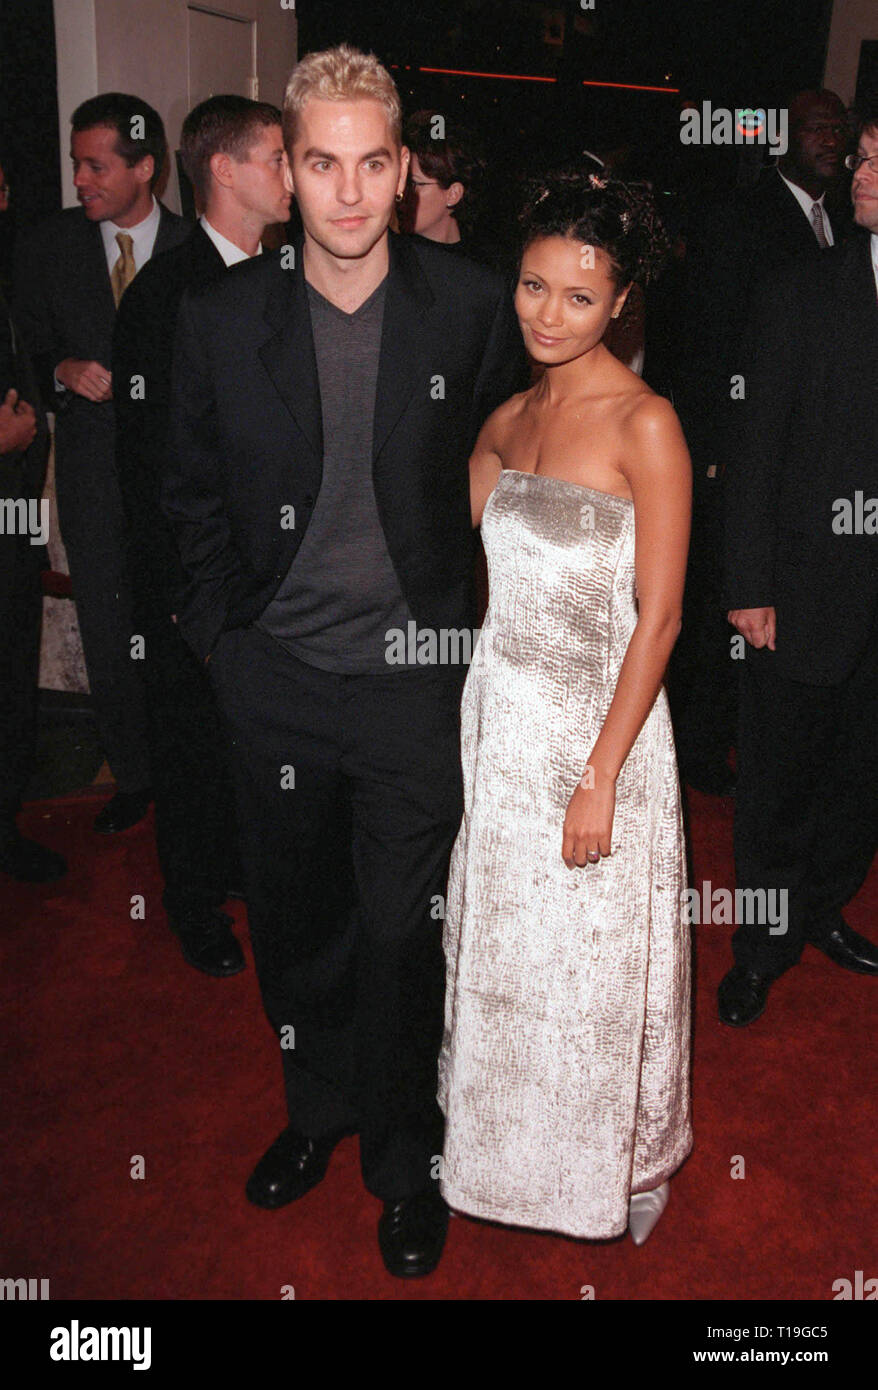 LOS ANGELES, CA - October 12, 1998: British actress THANDIE NEWTON & husband Ol Parker at the Los Angeles premiere of her new movie "Beloved" in which she stars with Oprah Winfrey. Stock Photo